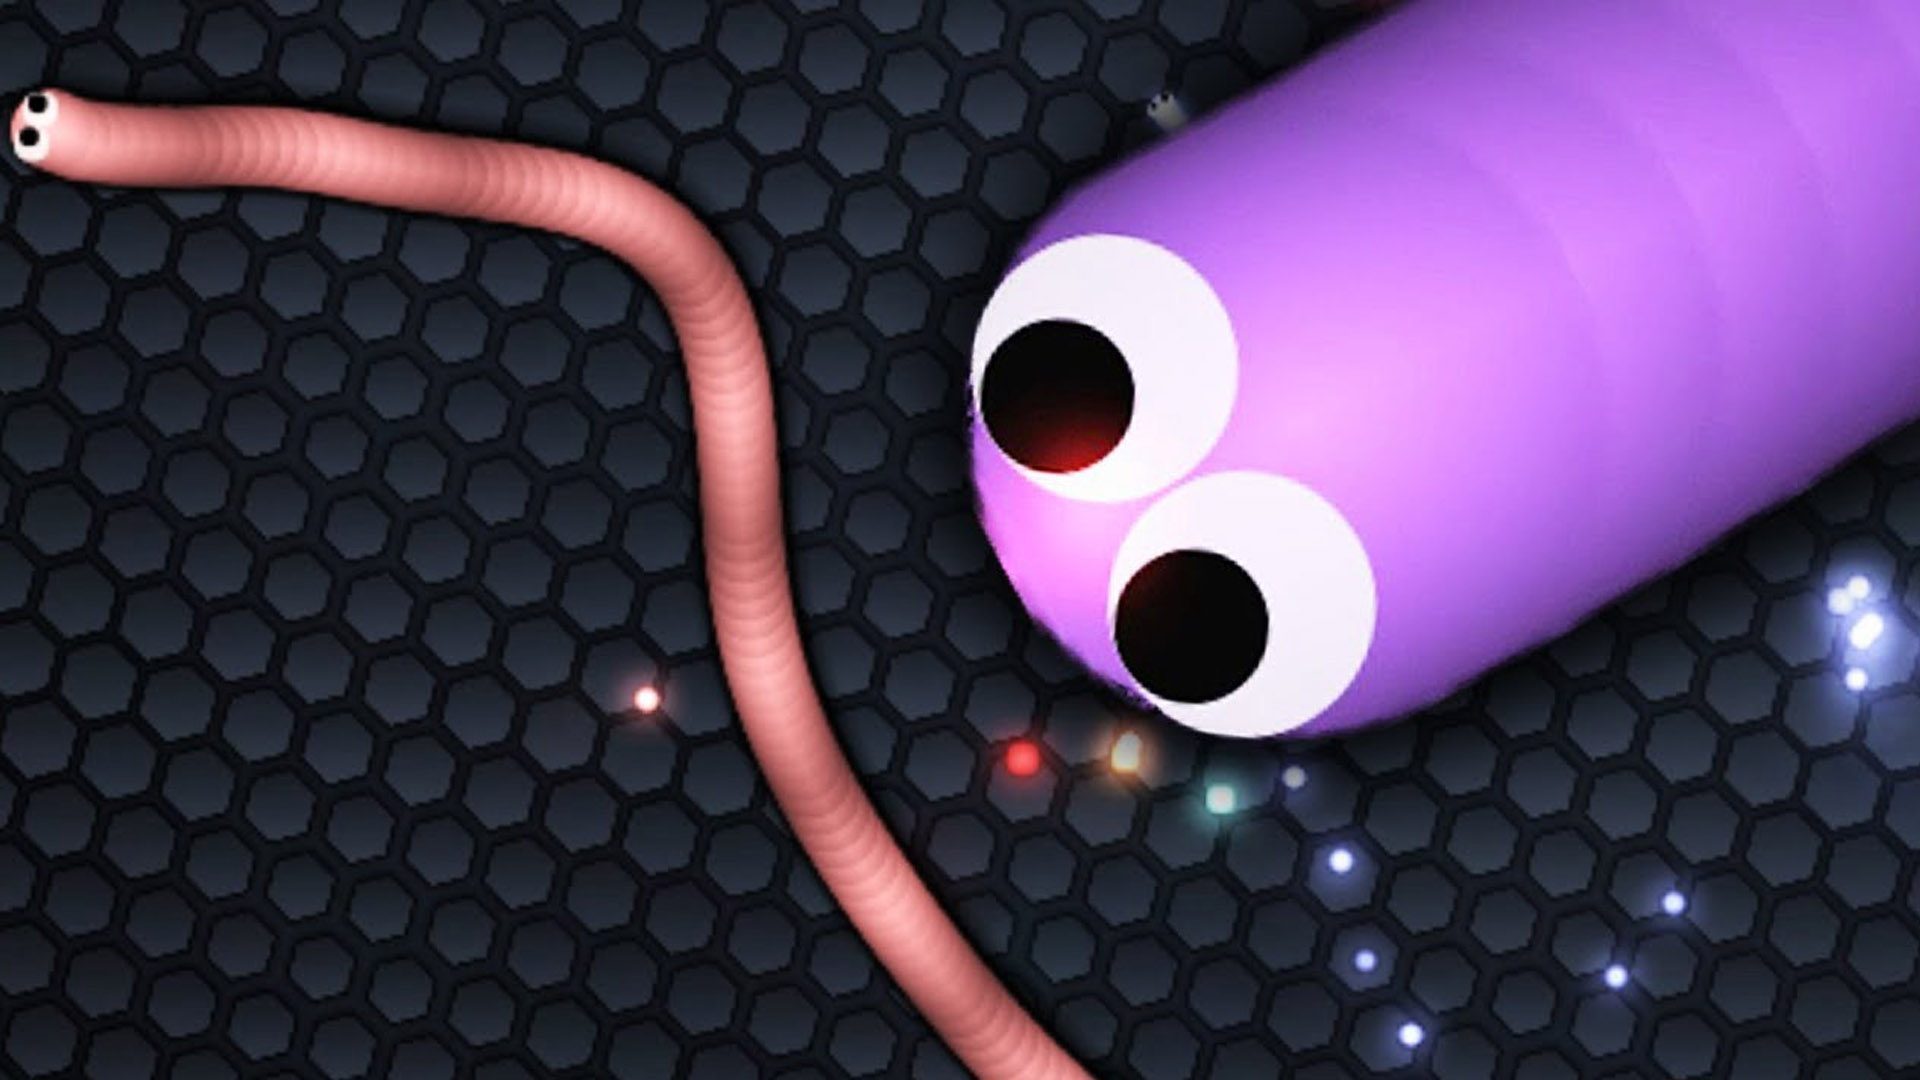 slither.io - slither.io updated their cover photo.